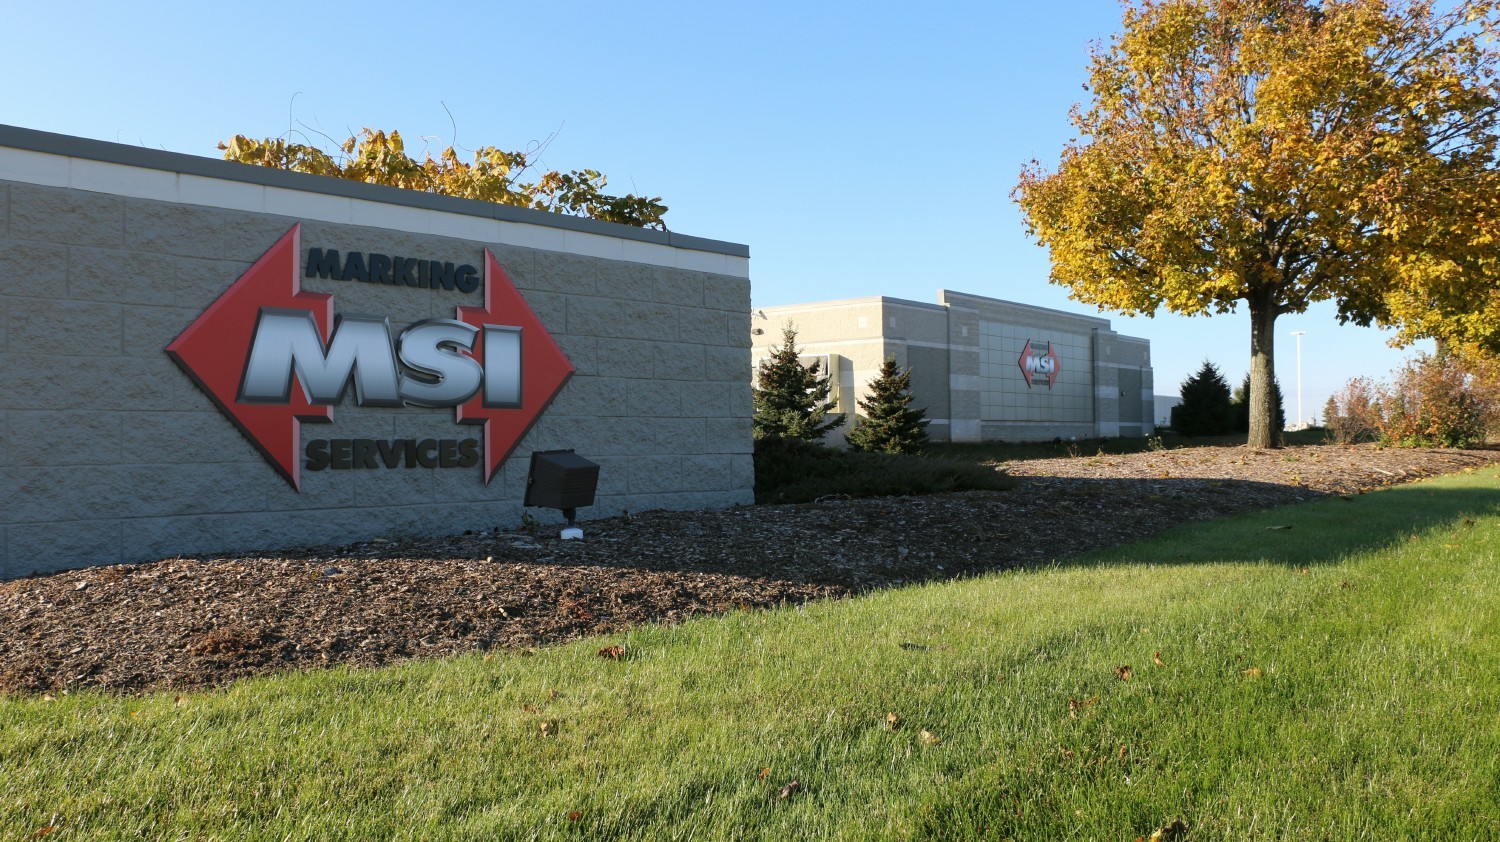 Marking Services, Inc (MSI) Corporate Headquarters located in Milwaukee, WI